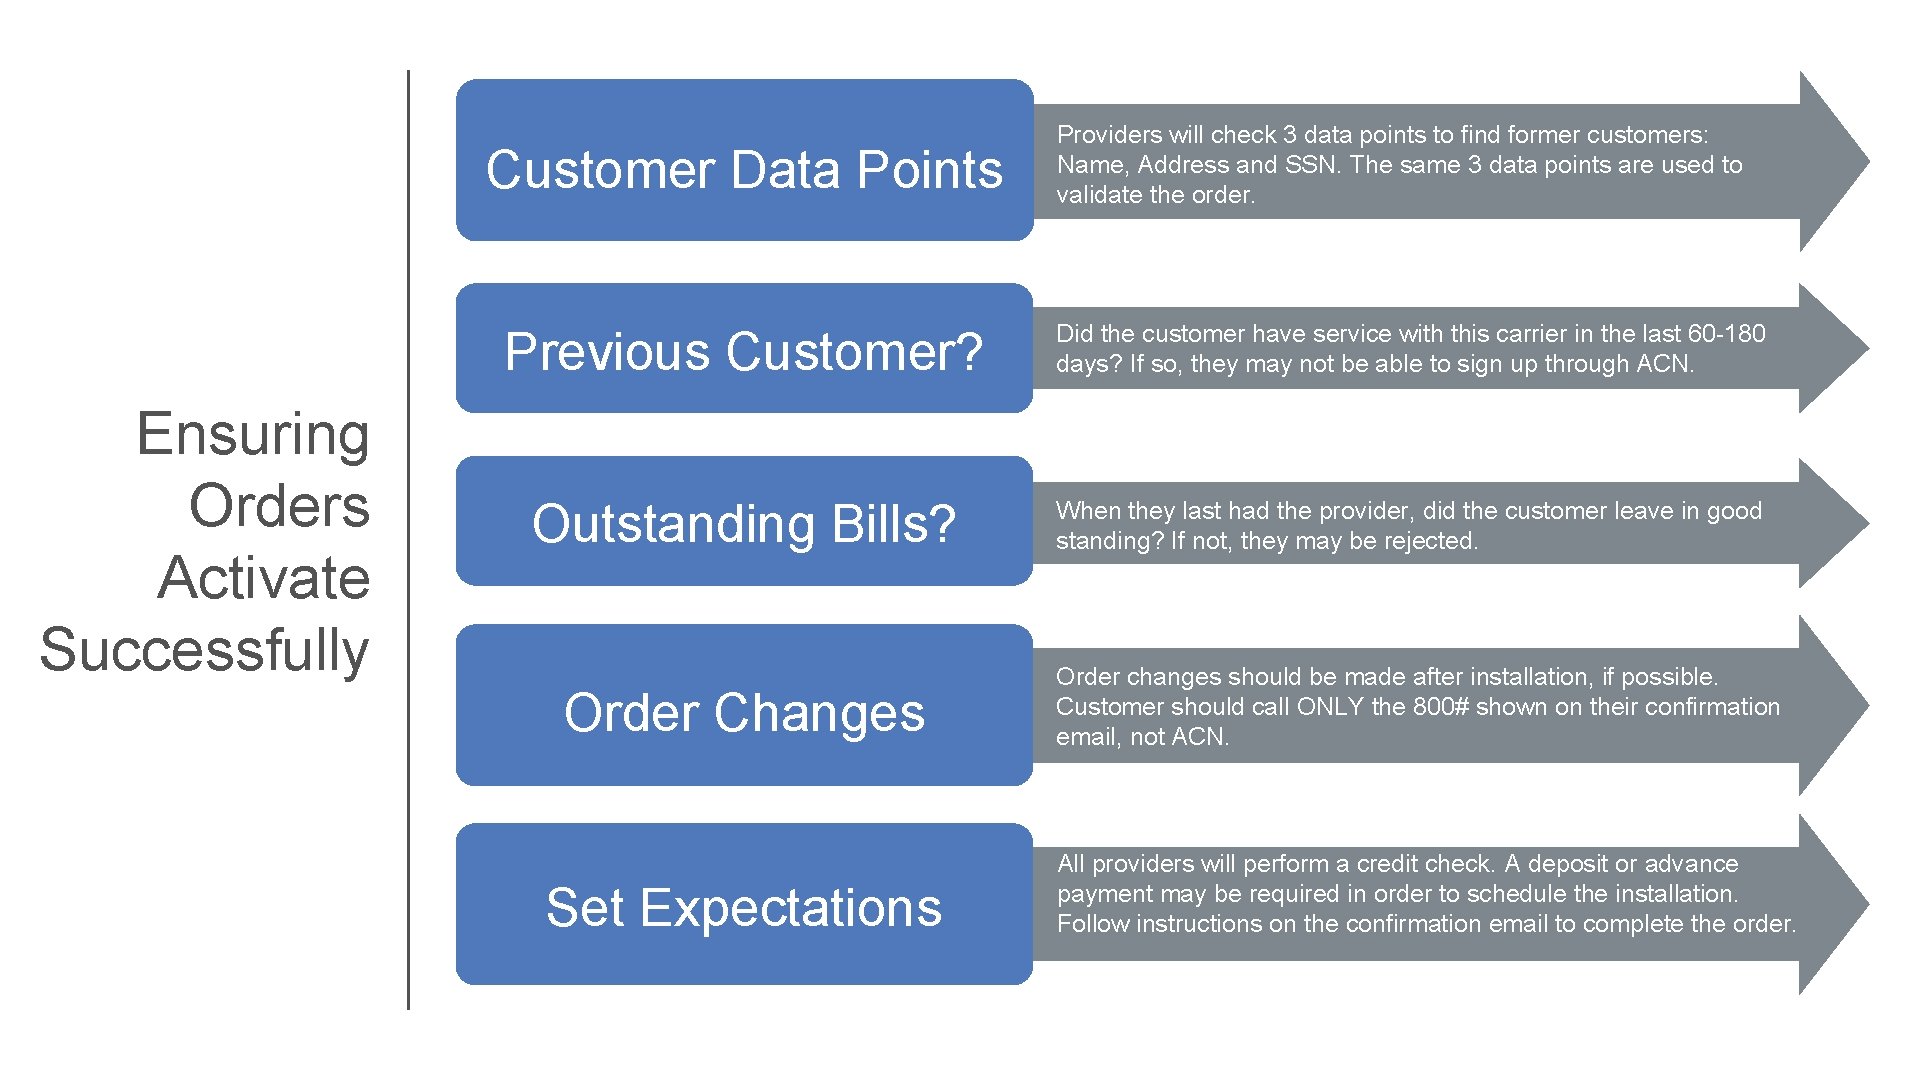 Customer Data Points Ensuring Orders Activate Successfully Providers will check 3 data points to